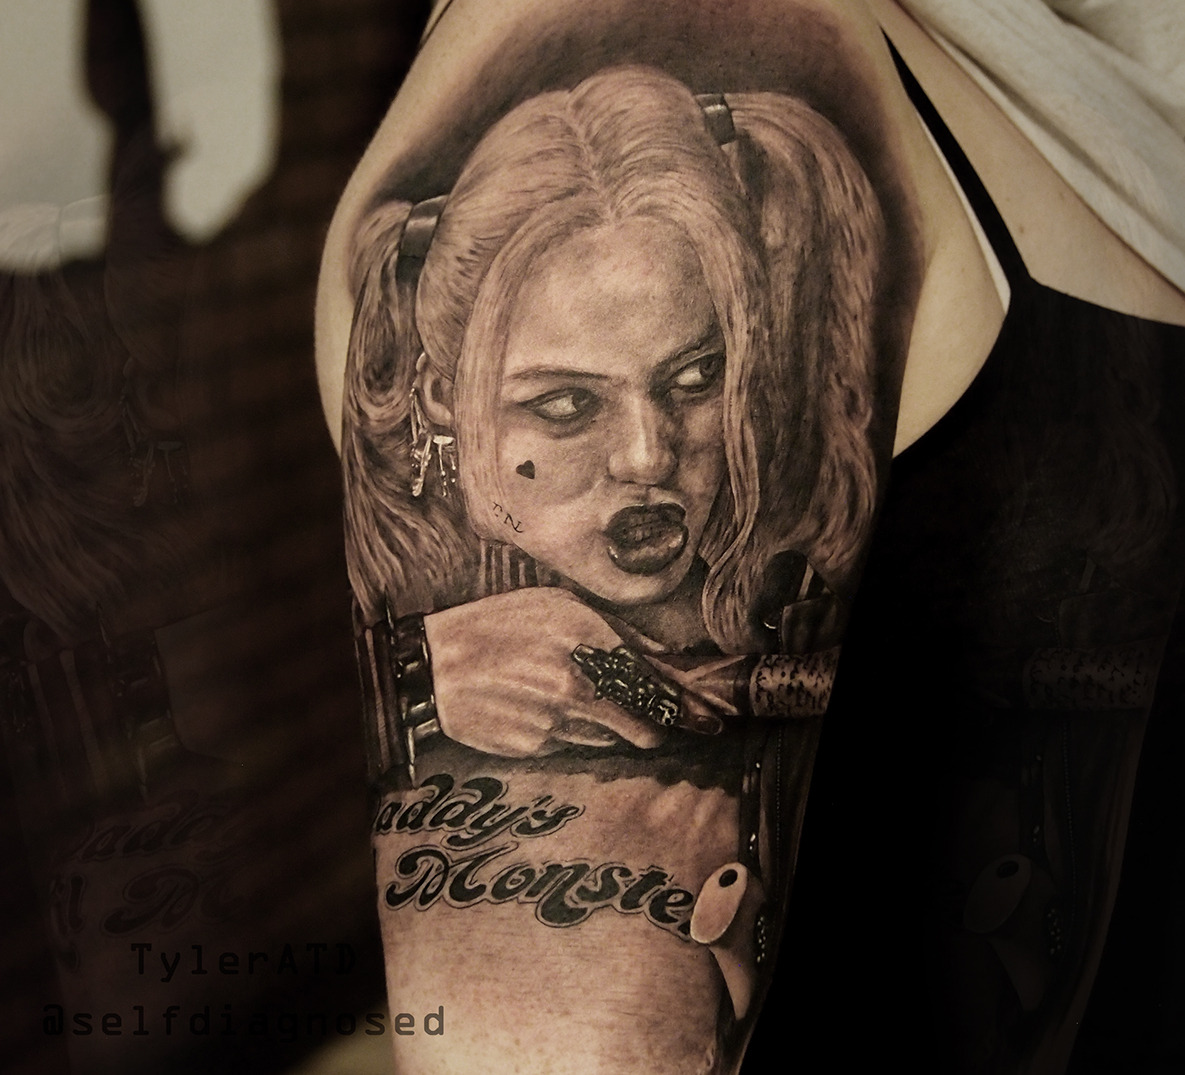 Tyler ATD Tattoos - Margot Robbie as Harley Quinn in Suicide Squad...